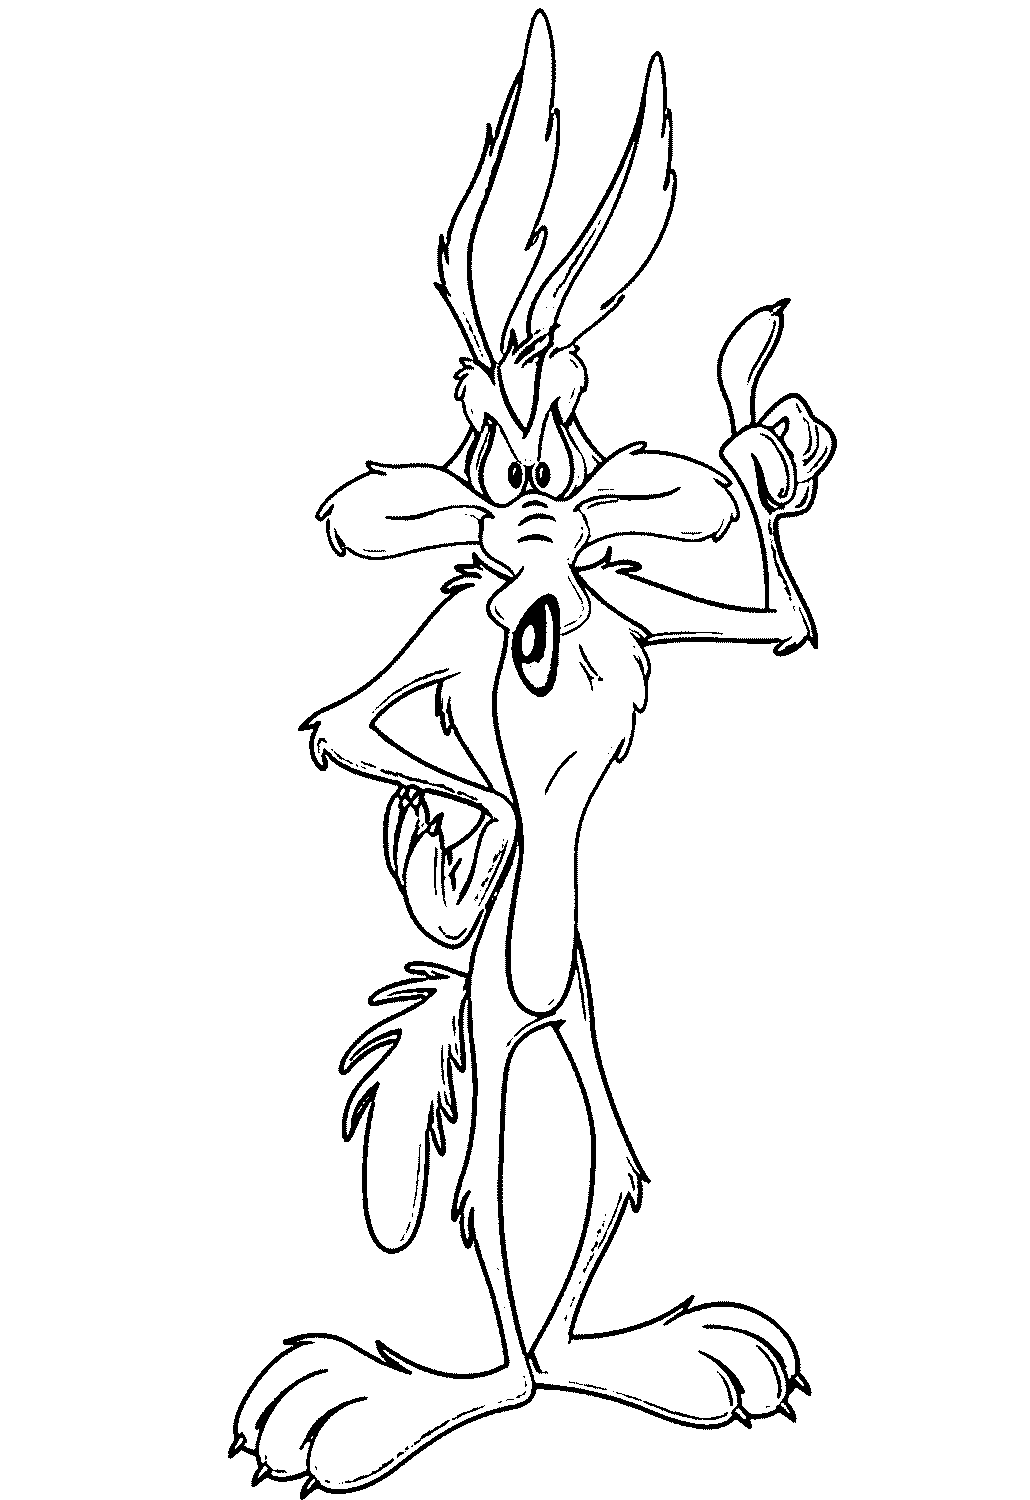 Wile E Coyote Coloring Page